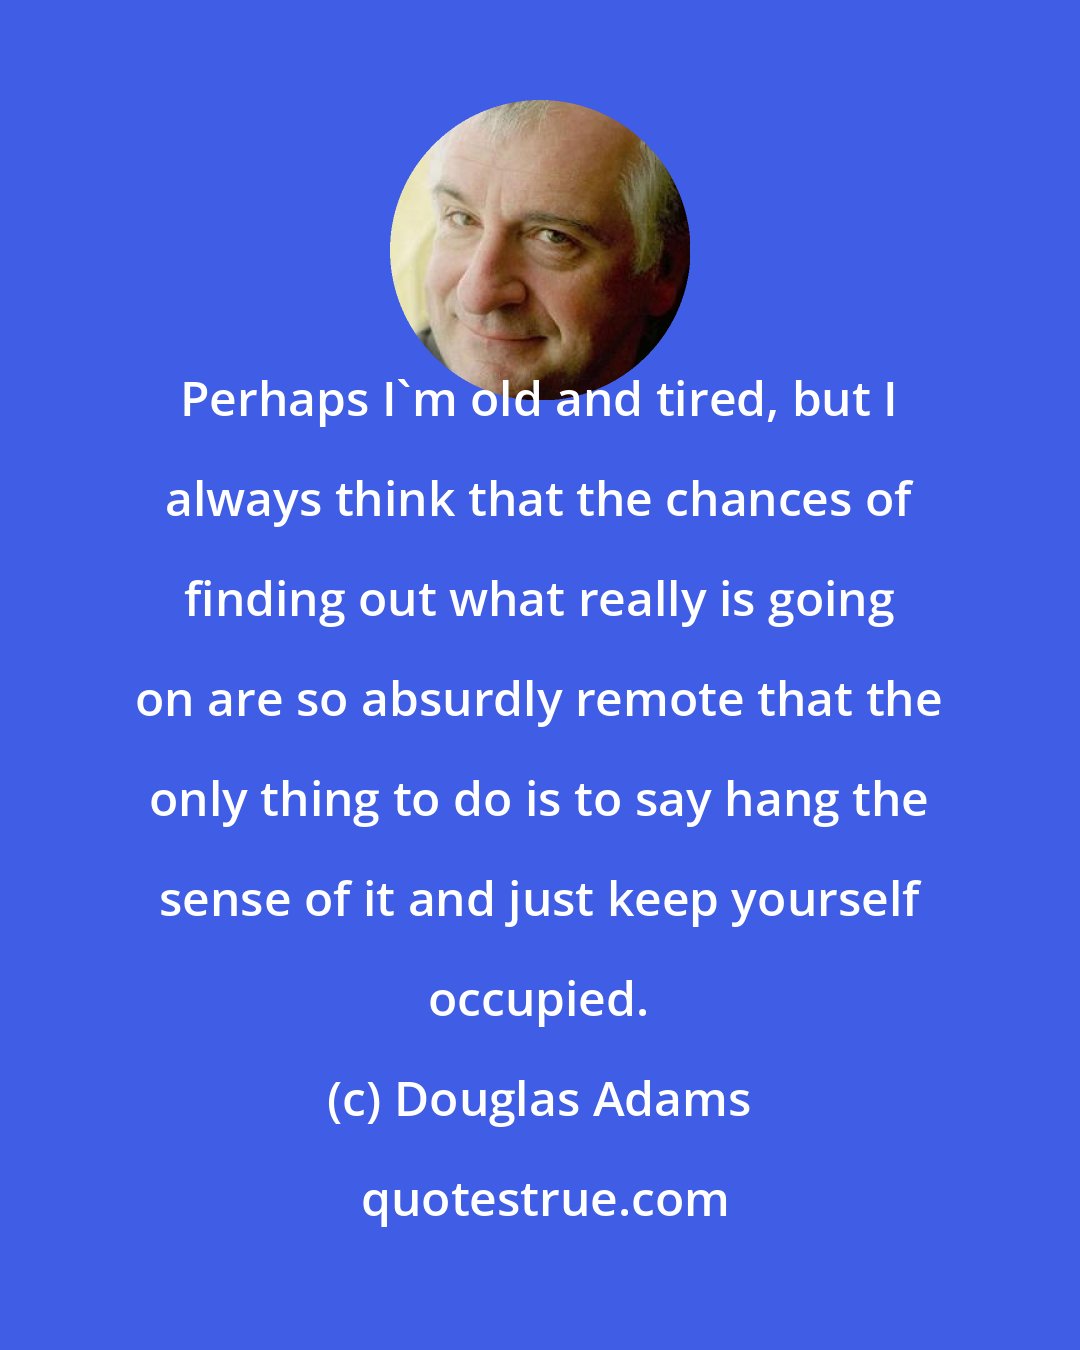 Douglas Adams: Perhaps I'm old and tired, but I always think that the chances of finding out what really is going on are so absurdly remote that the only thing to do is to say hang the sense of it and just keep yourself occupied.